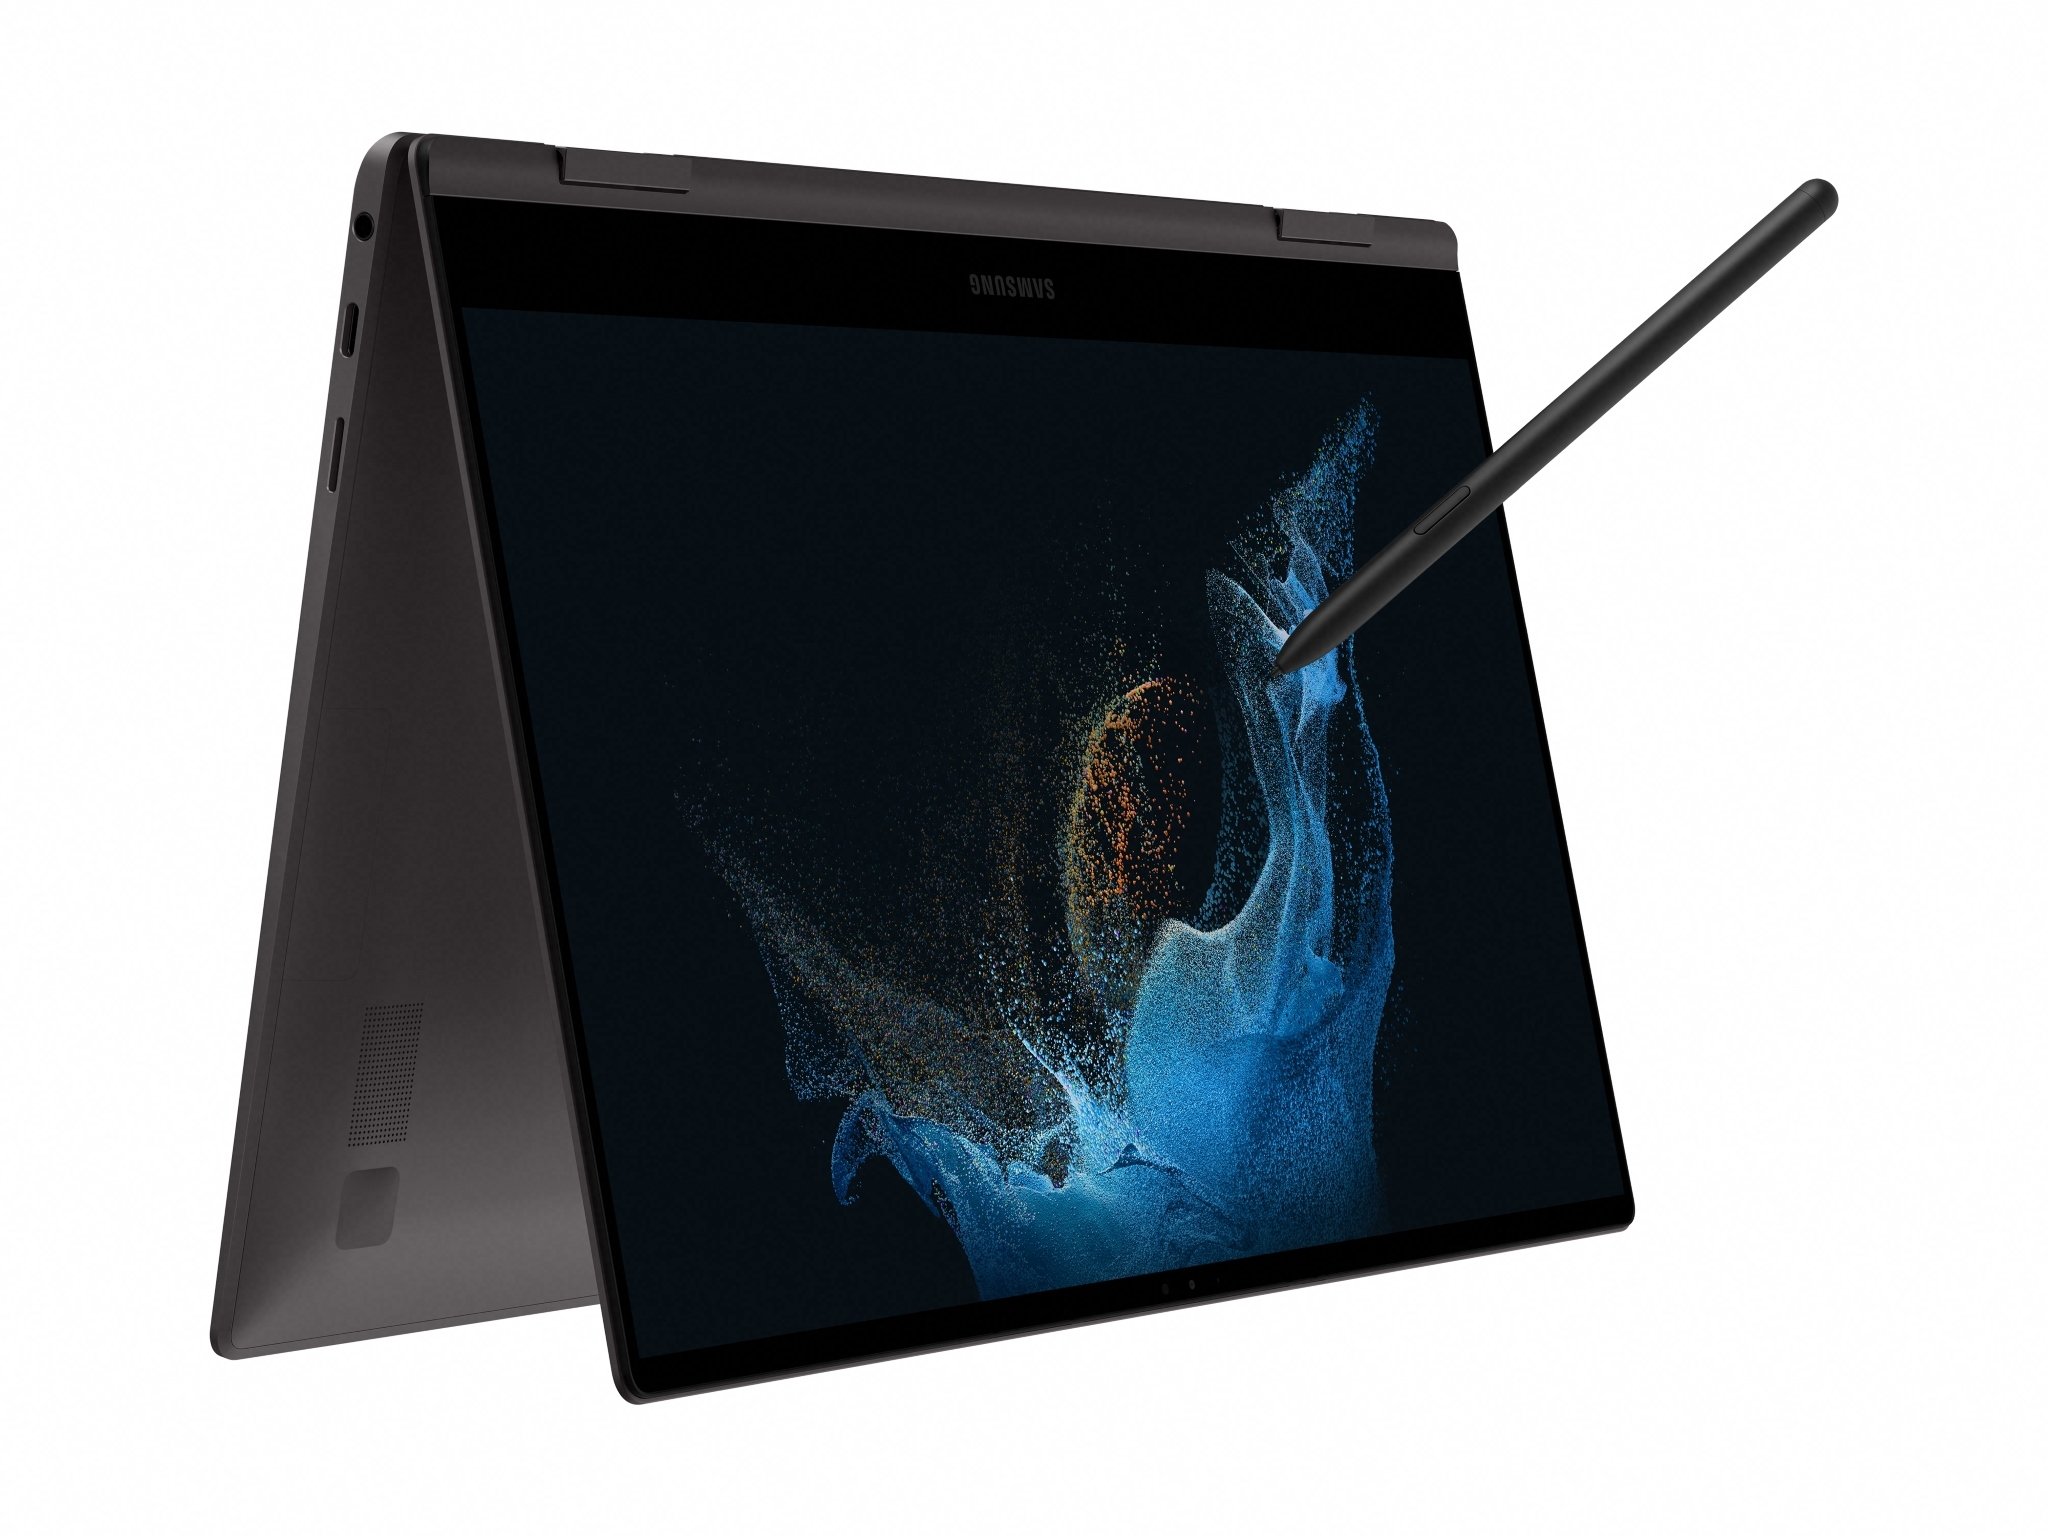 Samsung Galaxy Book2 Pro 360 00 Mars2 13 Wifi Us Graphite 025 Dynamic8 With S Pen Hi Phone 1 Final